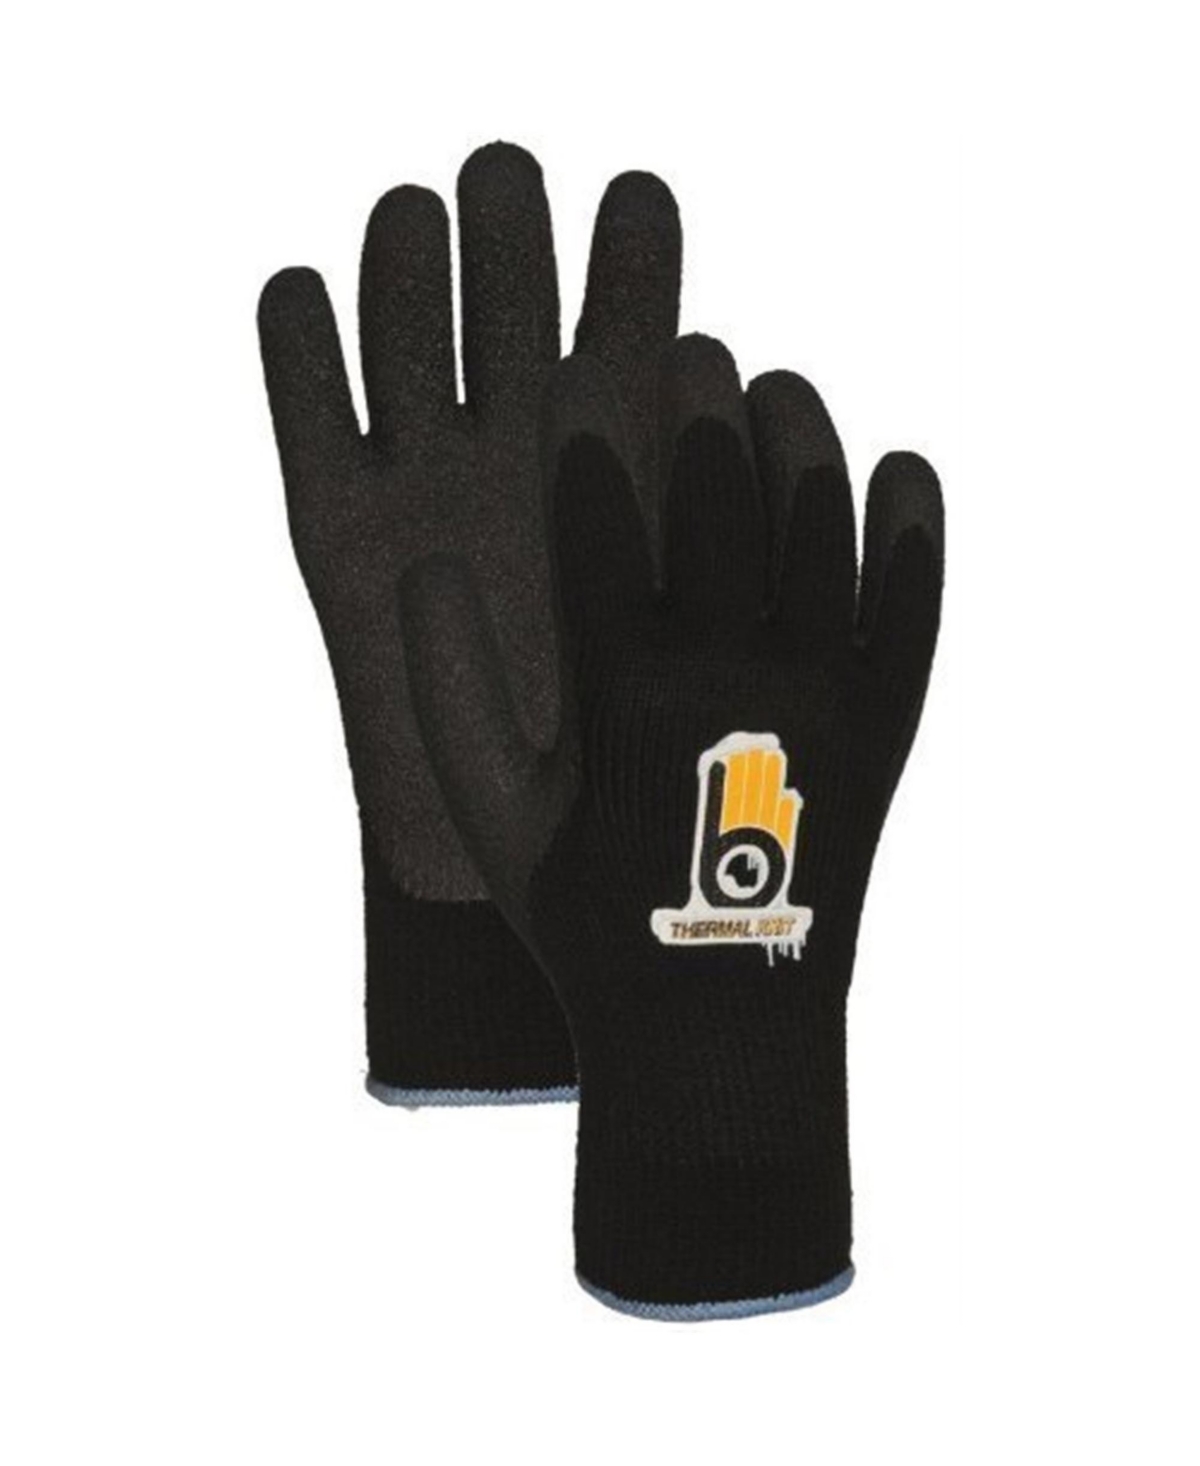 Atlas Thermal Knit with Rubber Palm, X-Large, Black